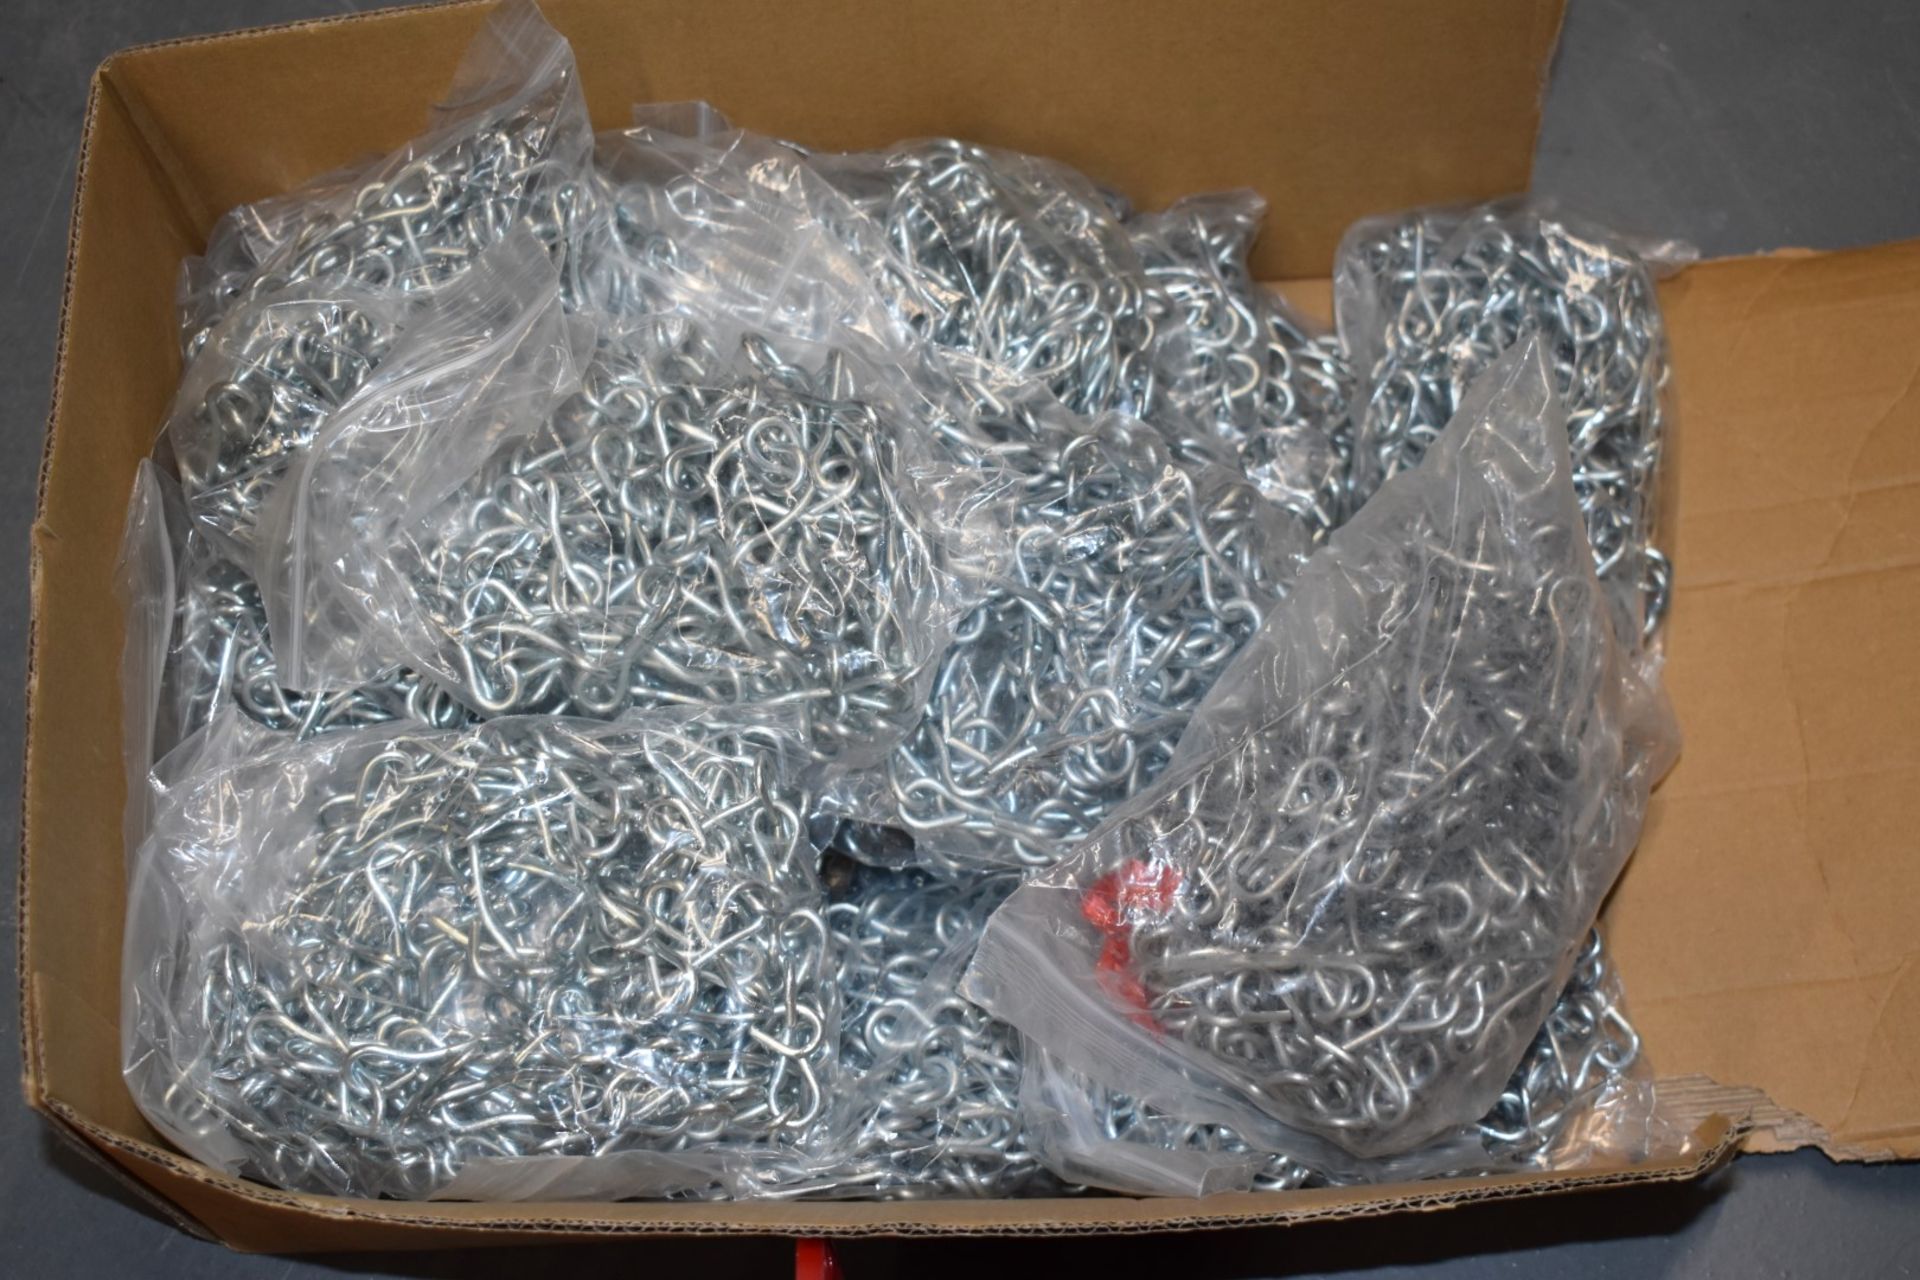 1 x Assorted Lot of Link Chain - Includes 175' Link Chain Reel, 20 Bags of Chain and Box of Chain - Image 9 of 9